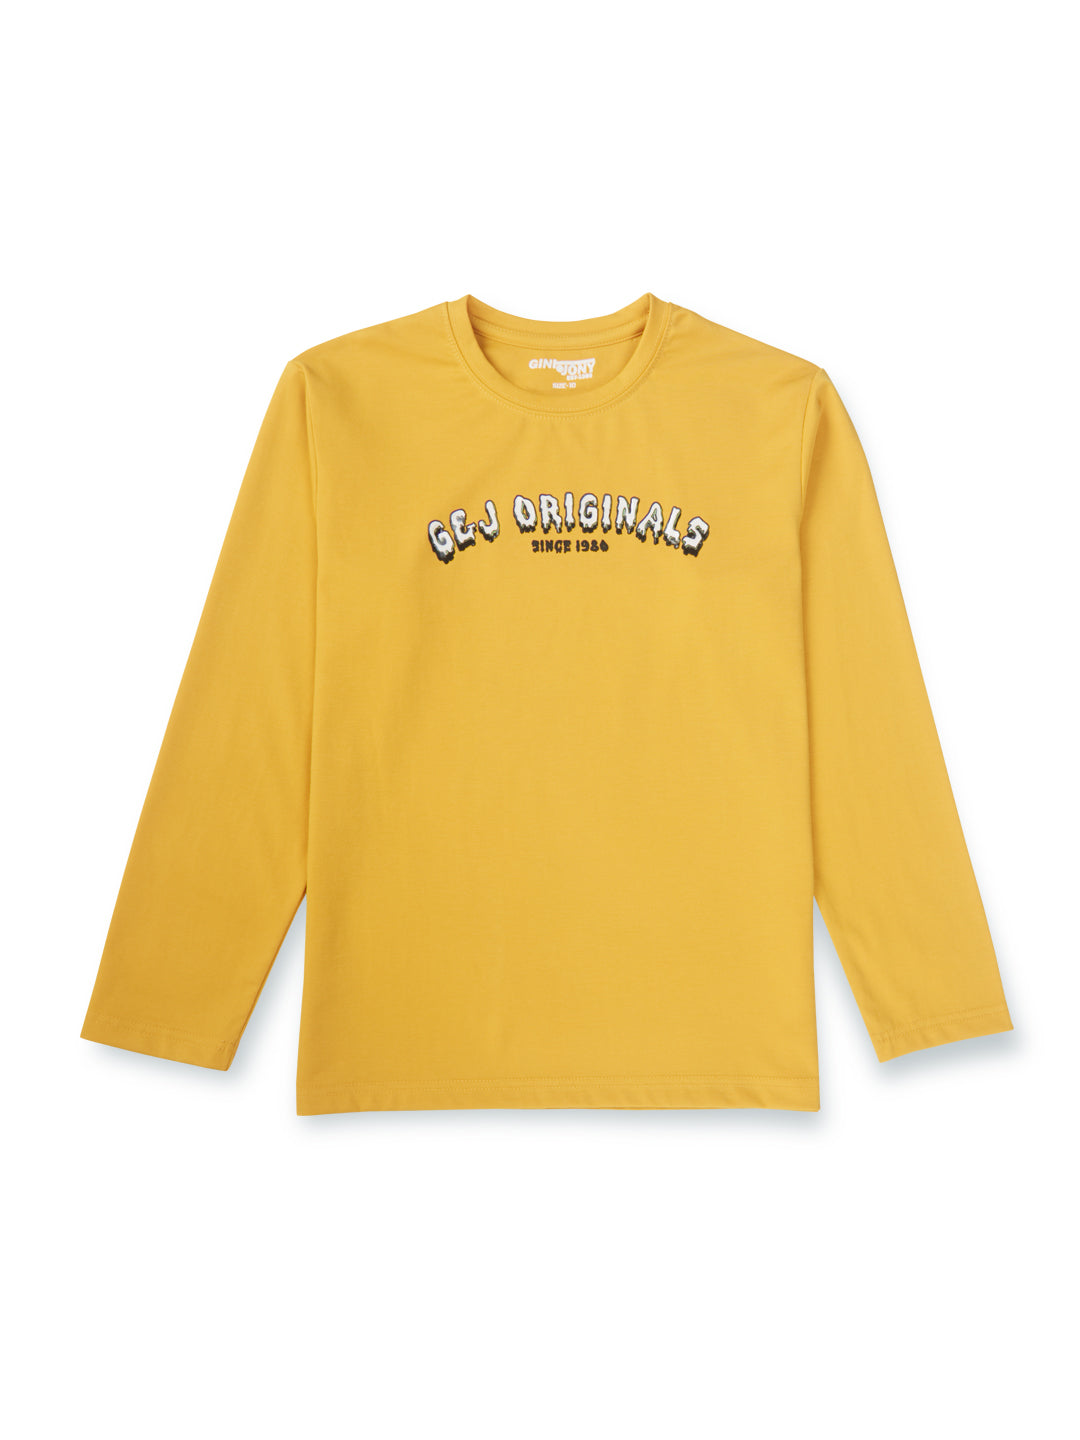 Boys Yellow Round Neck Knitted Cotton Printed T-Shirt